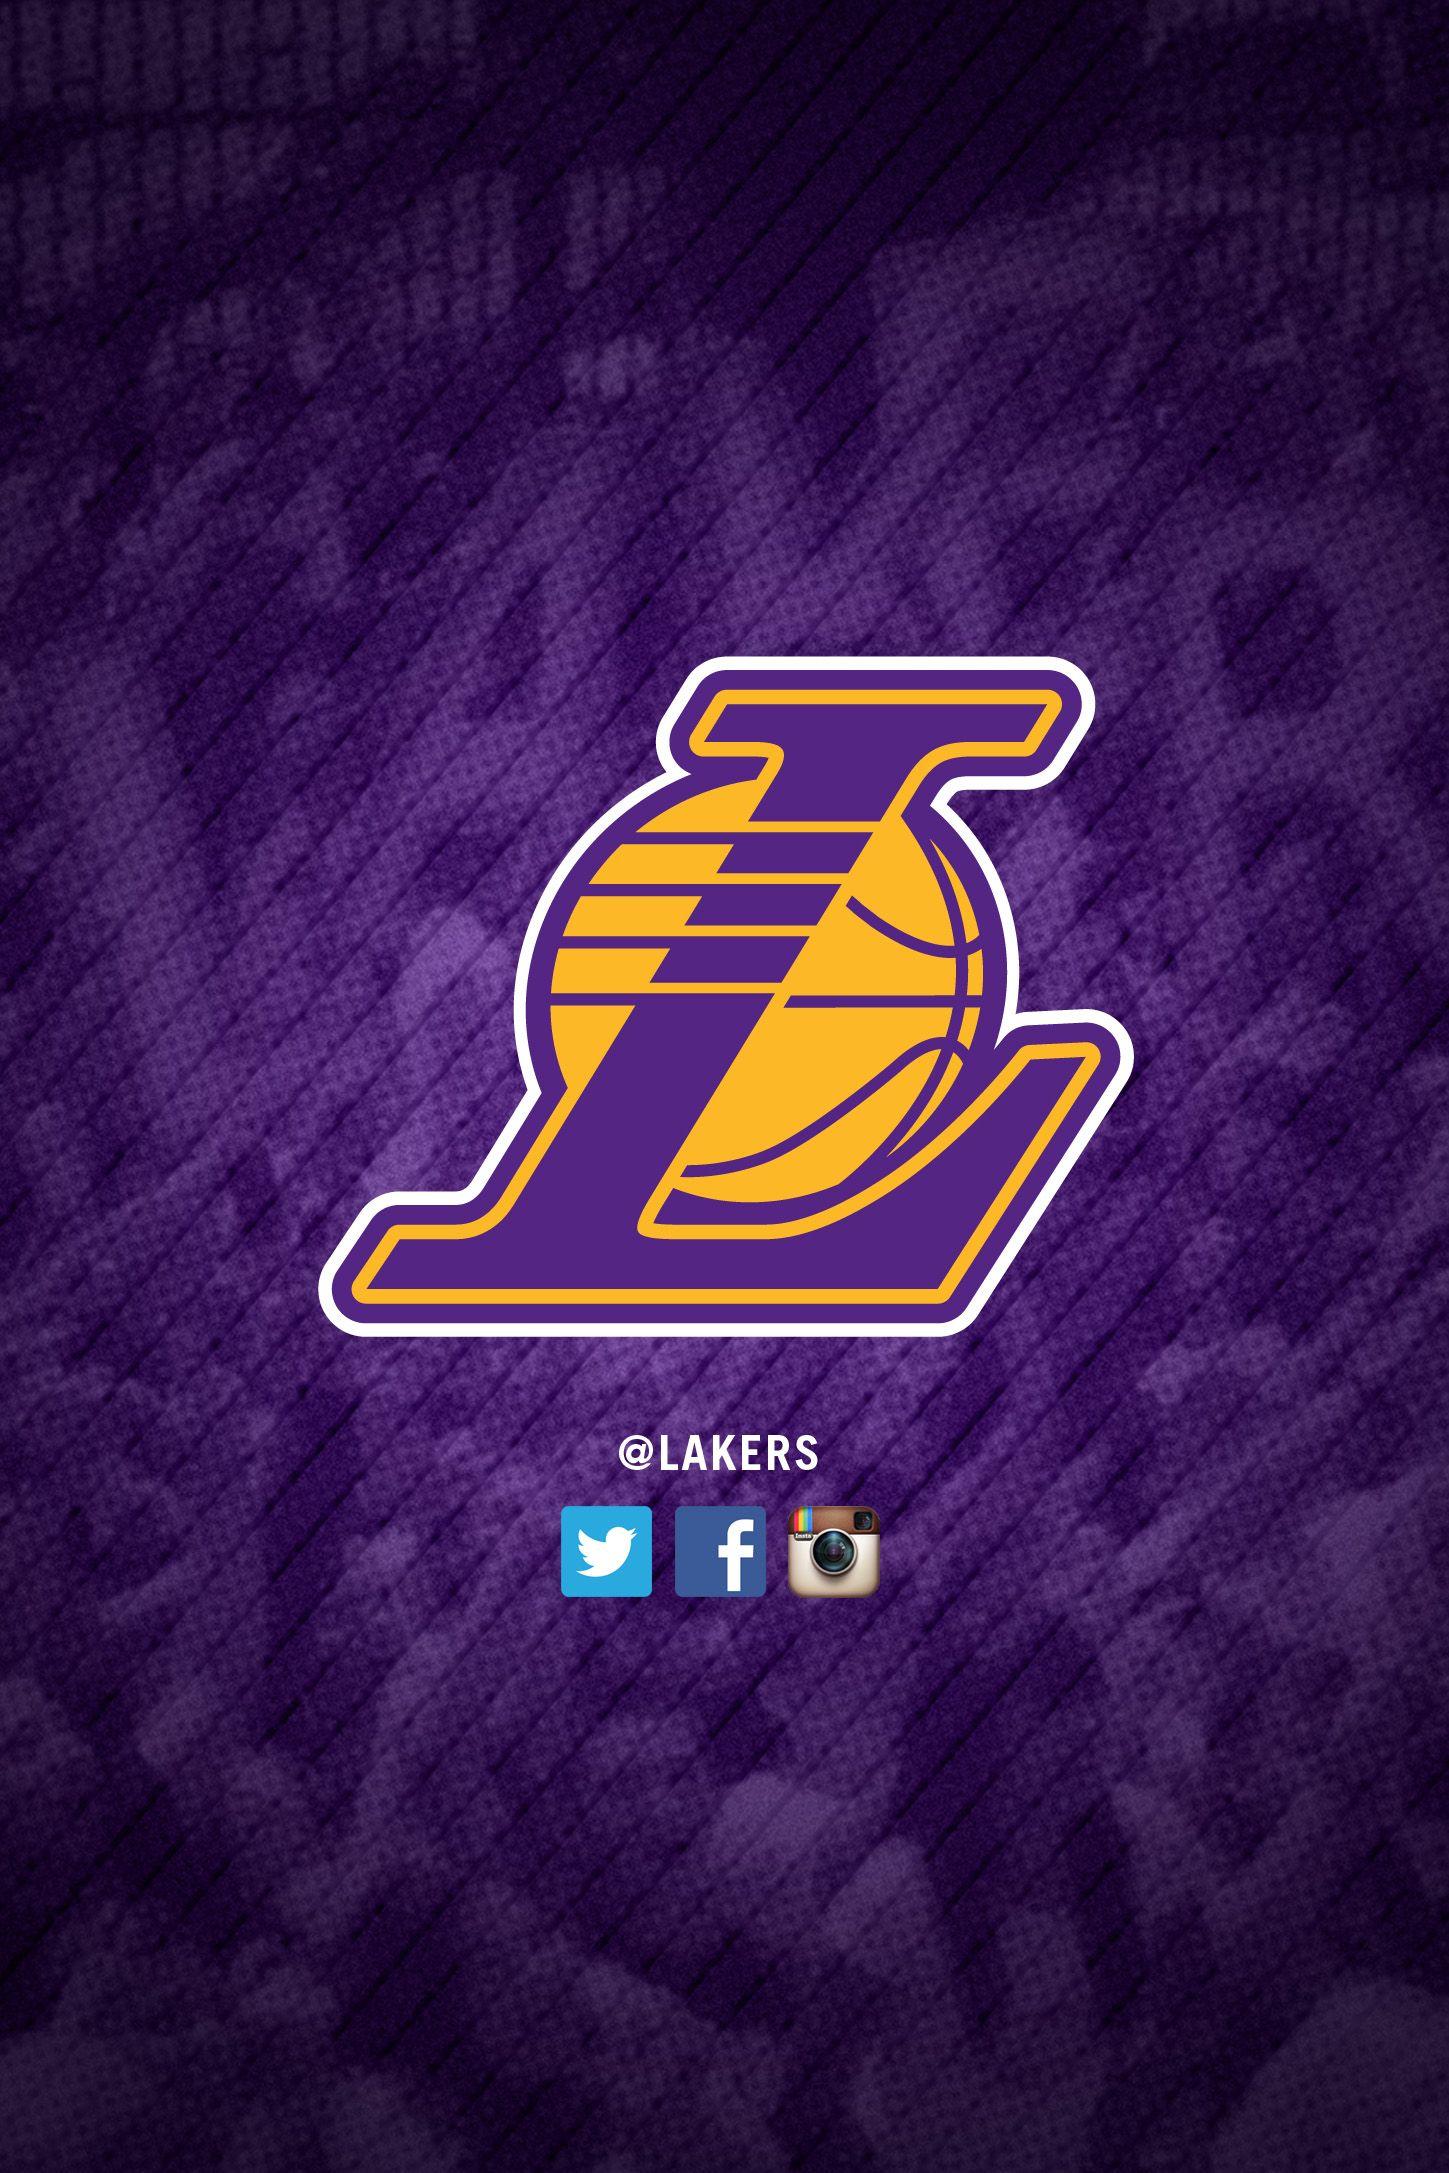 Best Lakers Wallpaper HD For I Phone